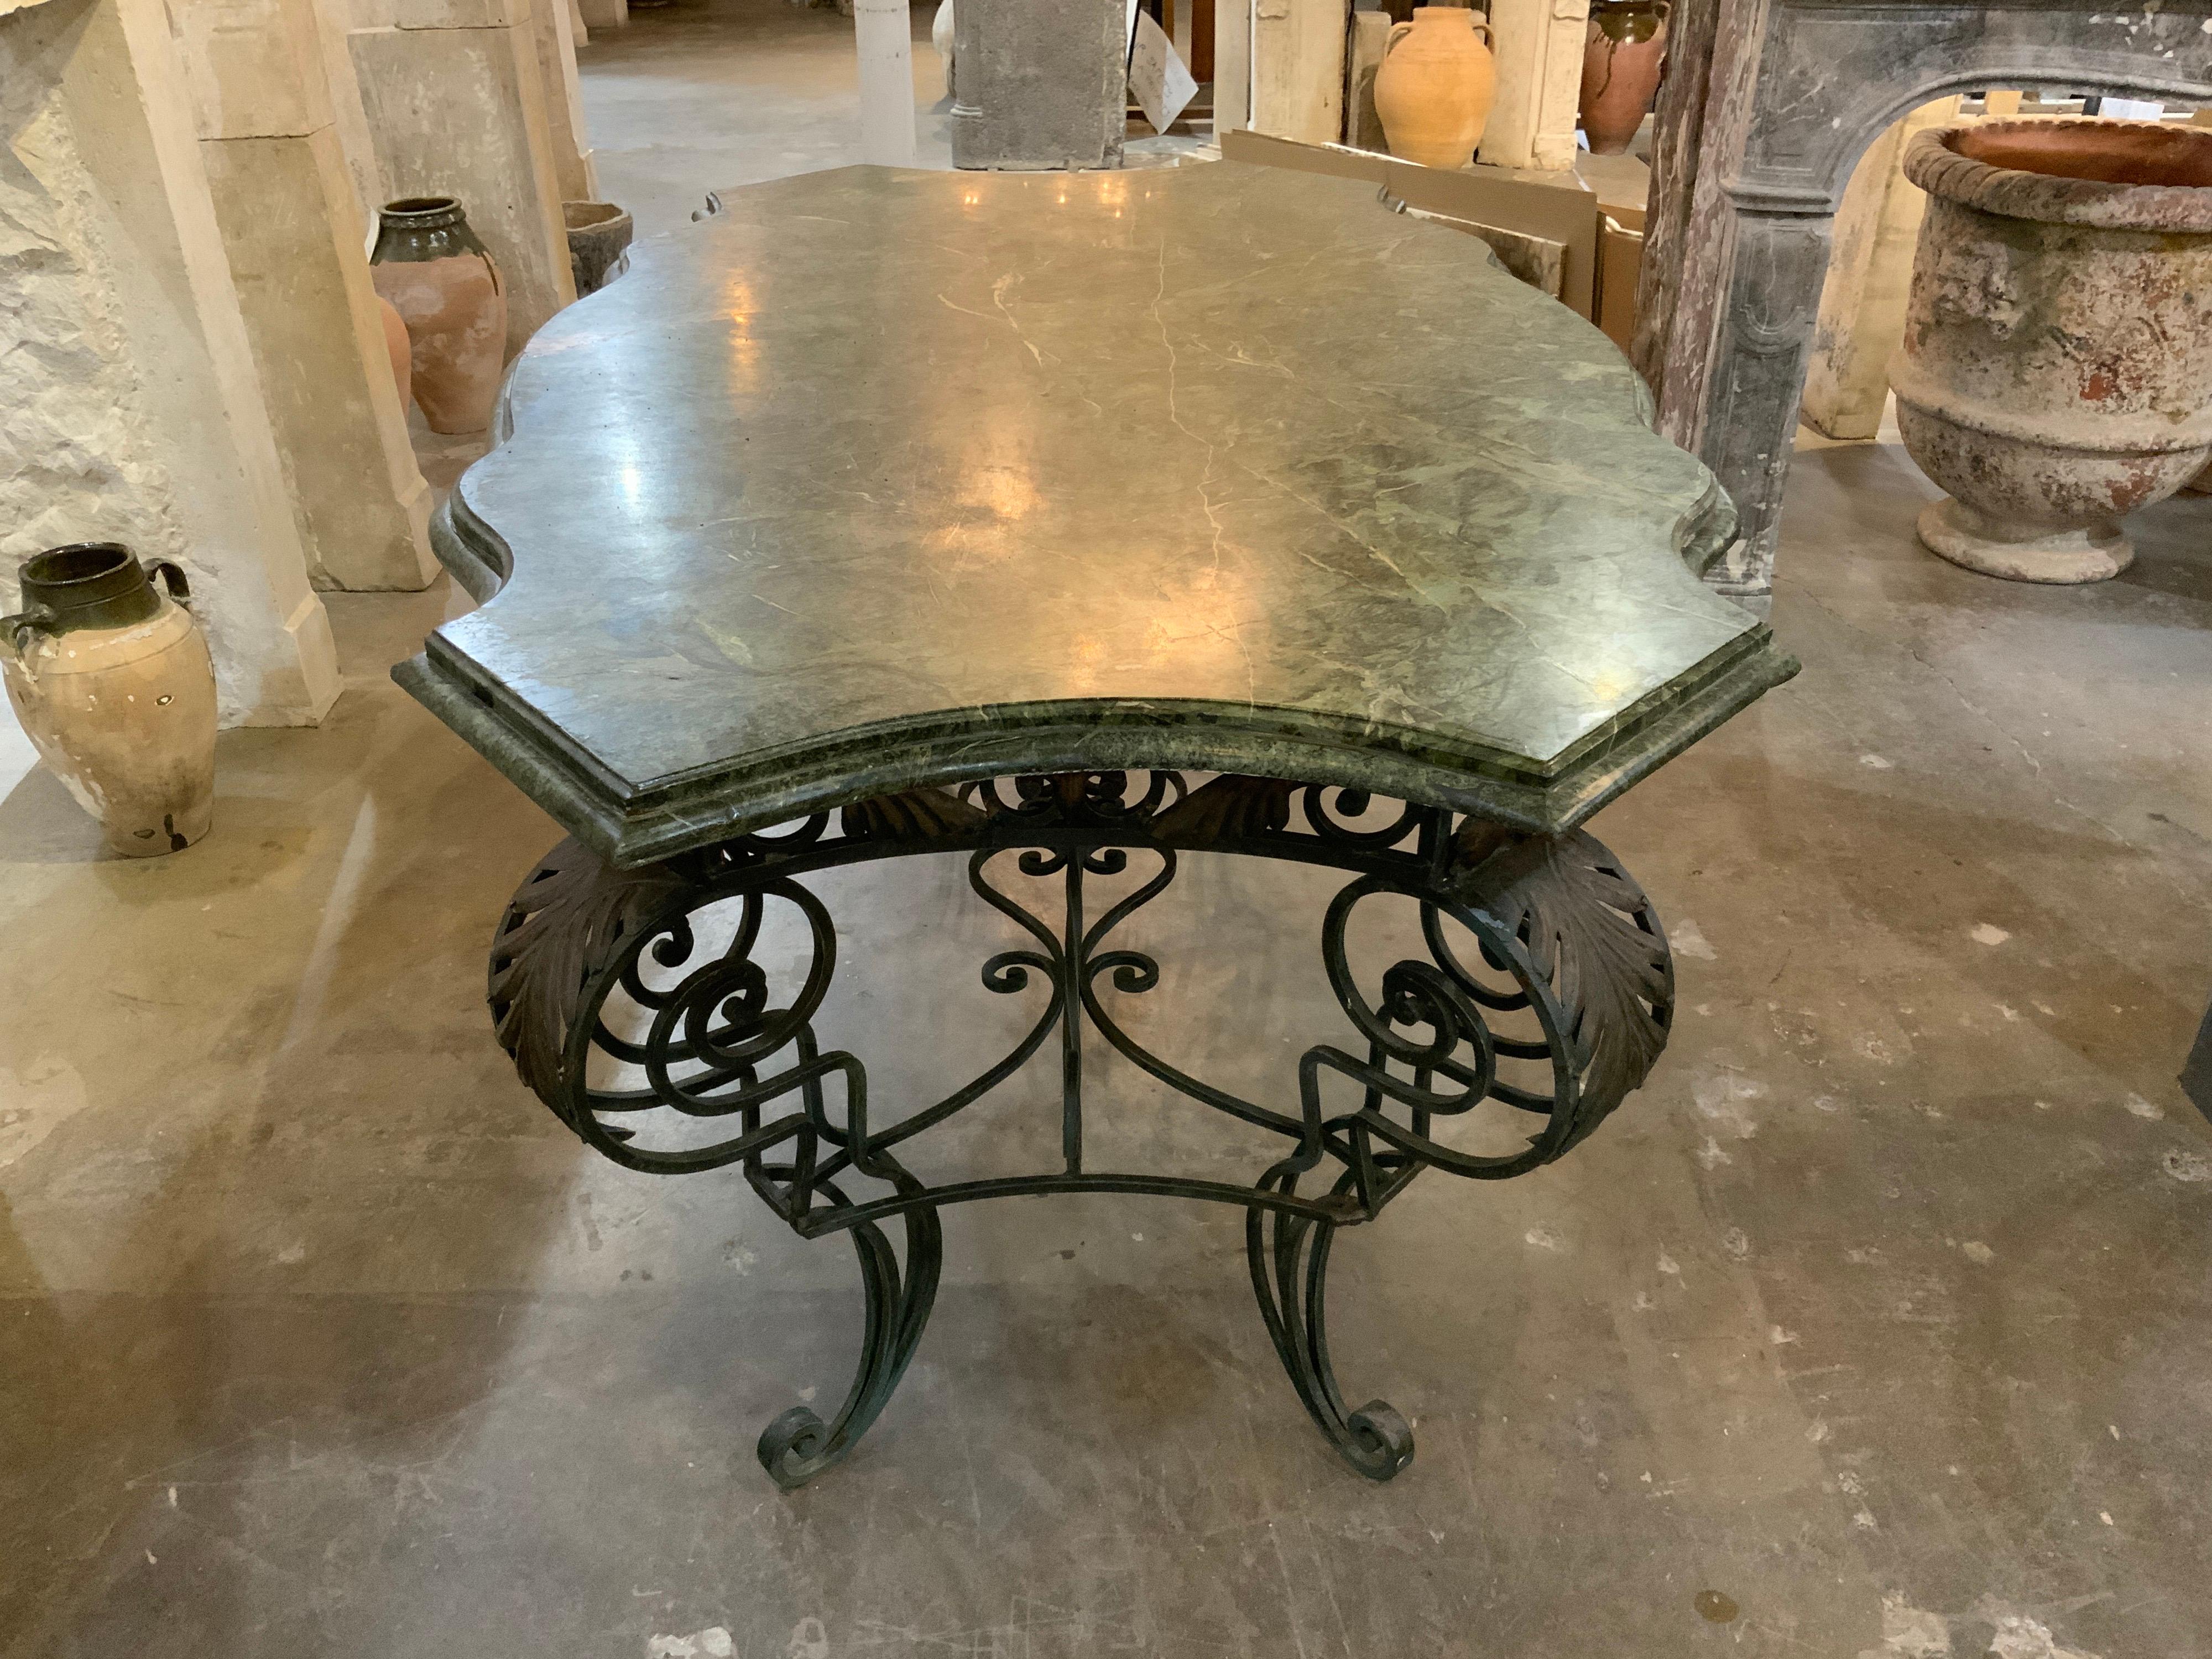 This marble table with iron base originates from France, circa 1880.